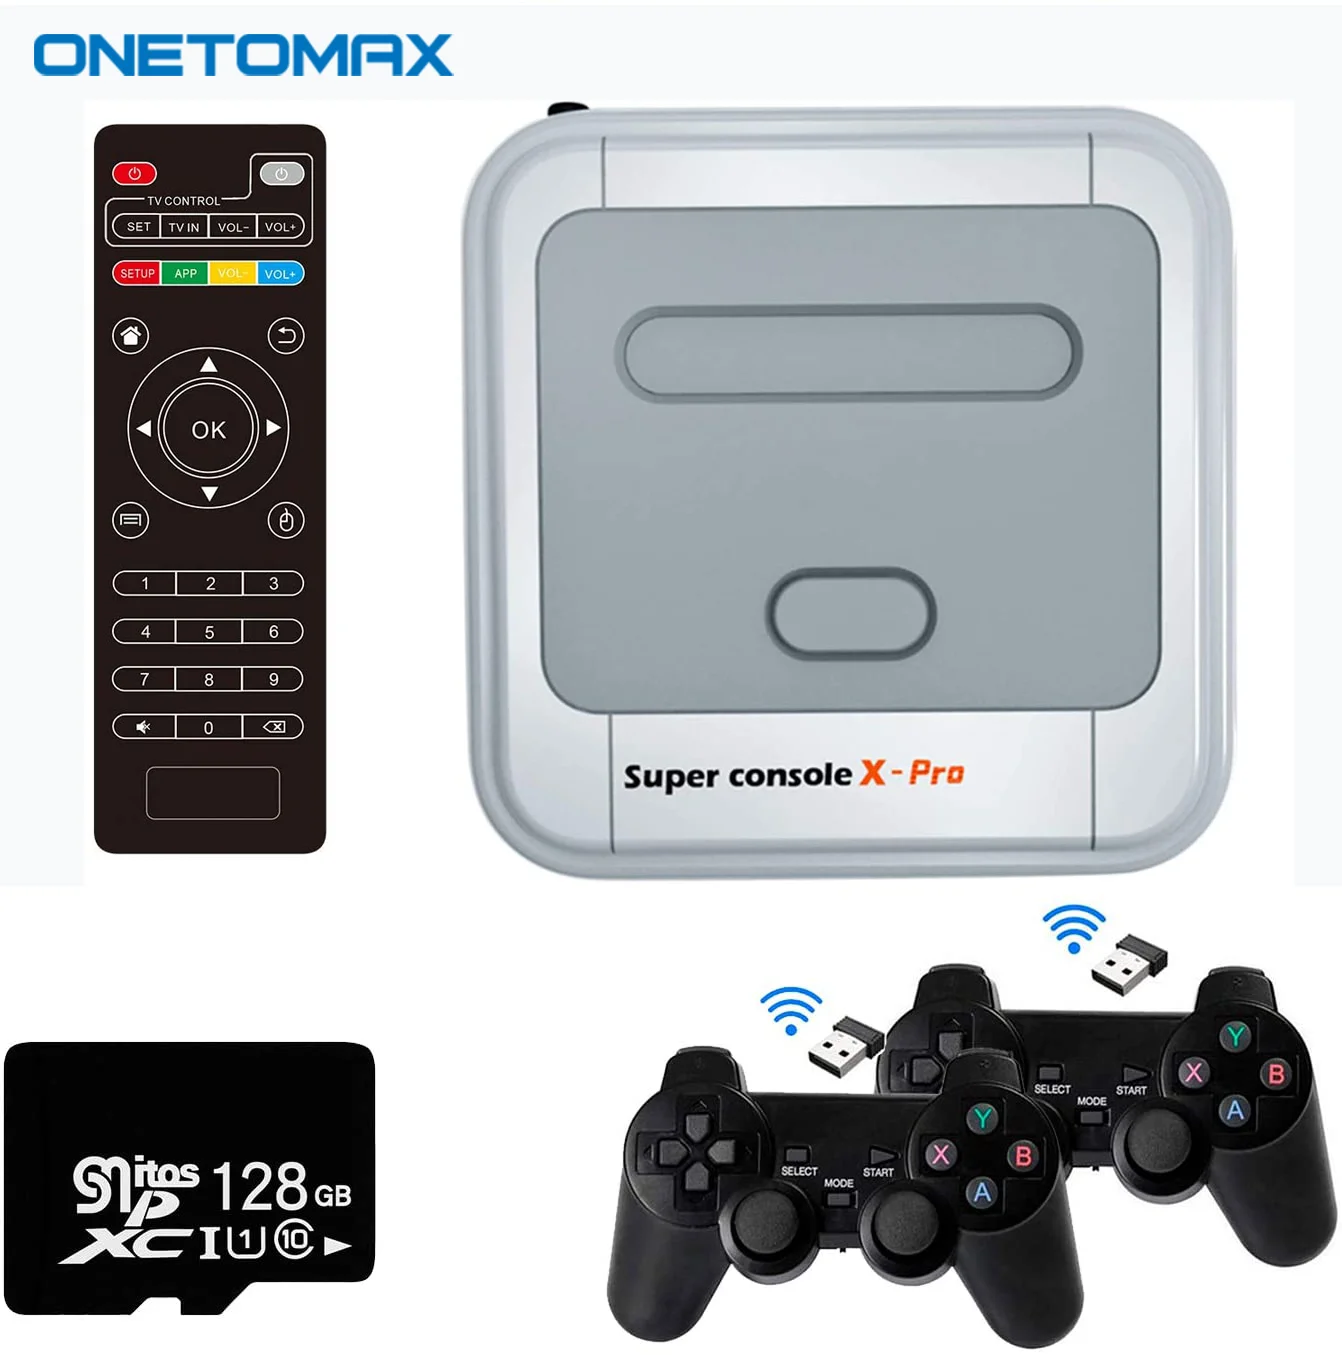 Retro Game Console X Pro 50+ Emulator Amlogic S905X WiFi 50000+ Games For PS1 4K HD Mini TV Box Video Game Player For PS1/N64/DC